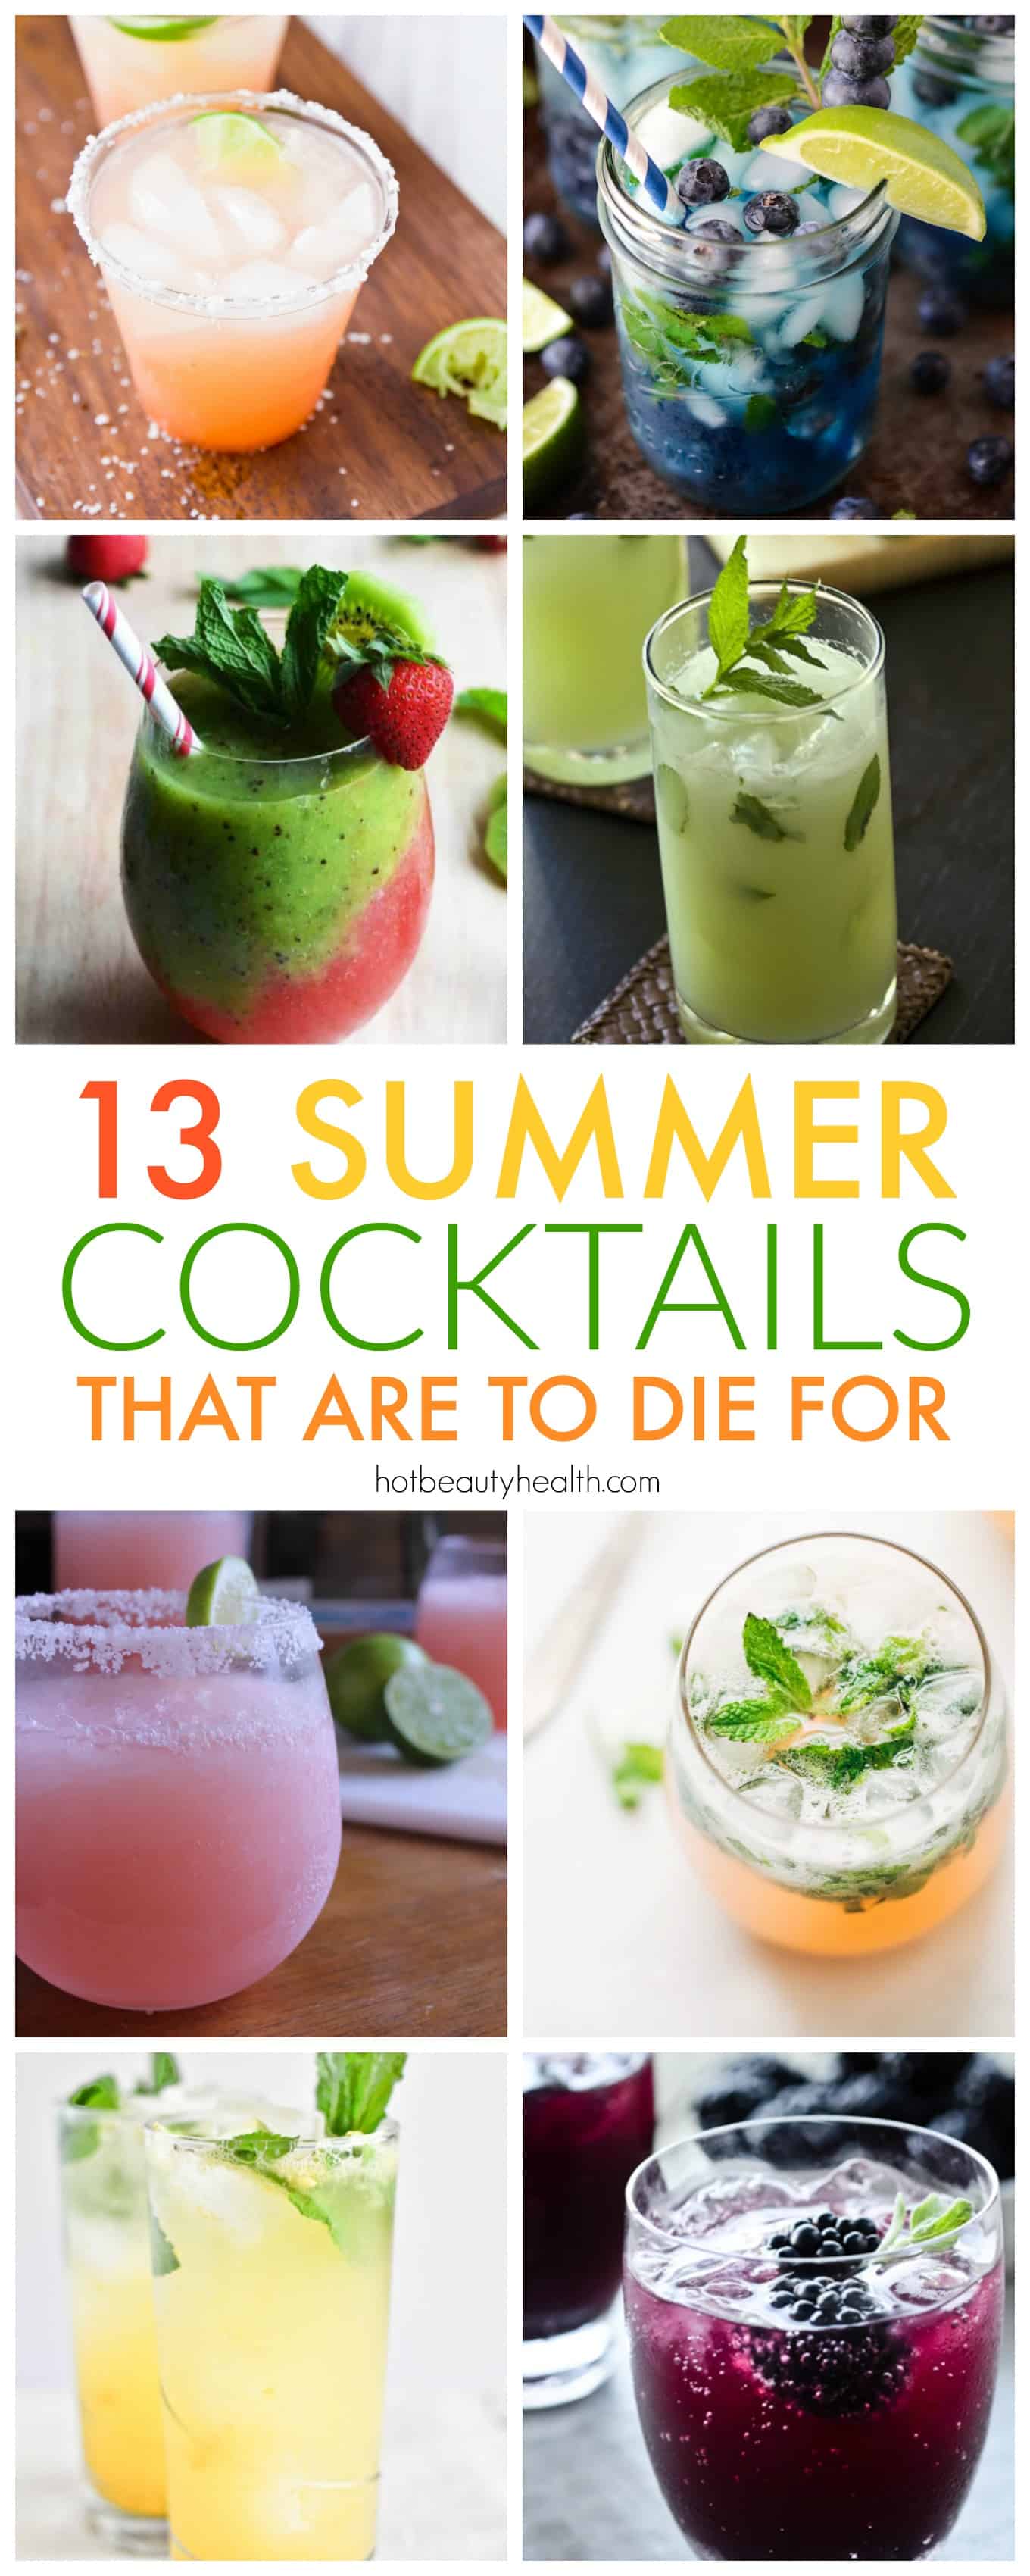 13 easy summer cocktails with recipes created by some of my favorite food bloggers. Perfect to serve for a crowd and made with different types of alcohol (vodka, rum, and more!).